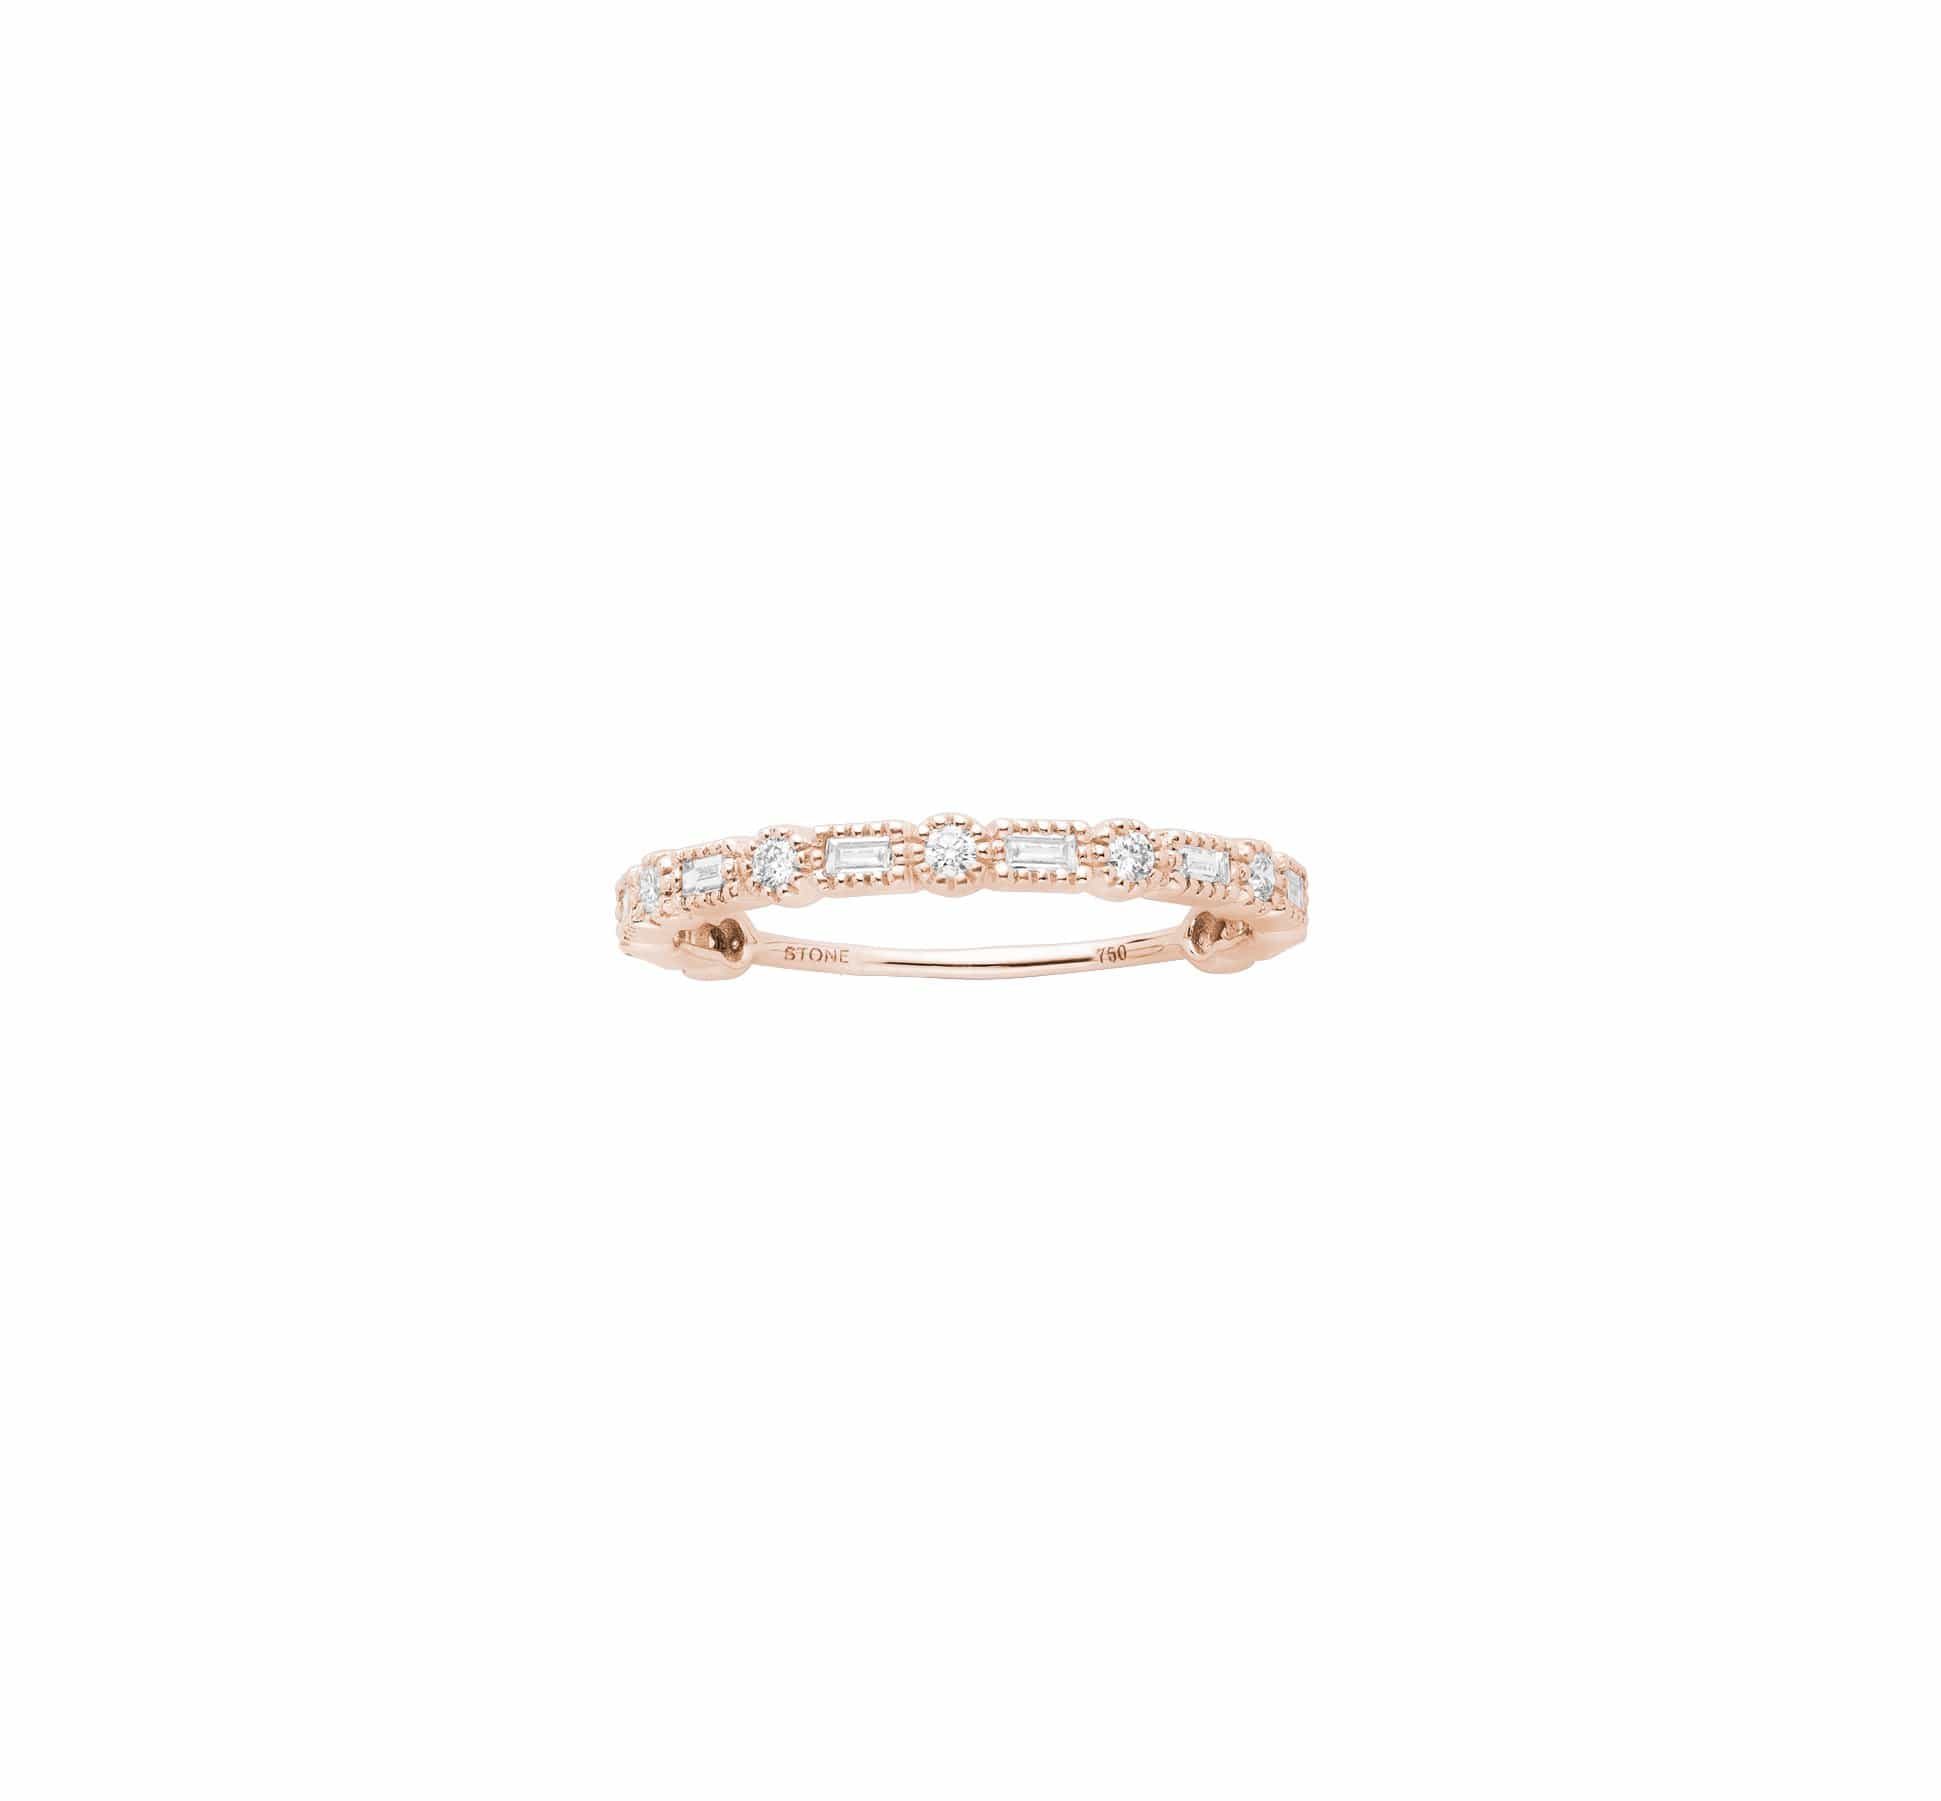 Serenity Gold and diamonds band